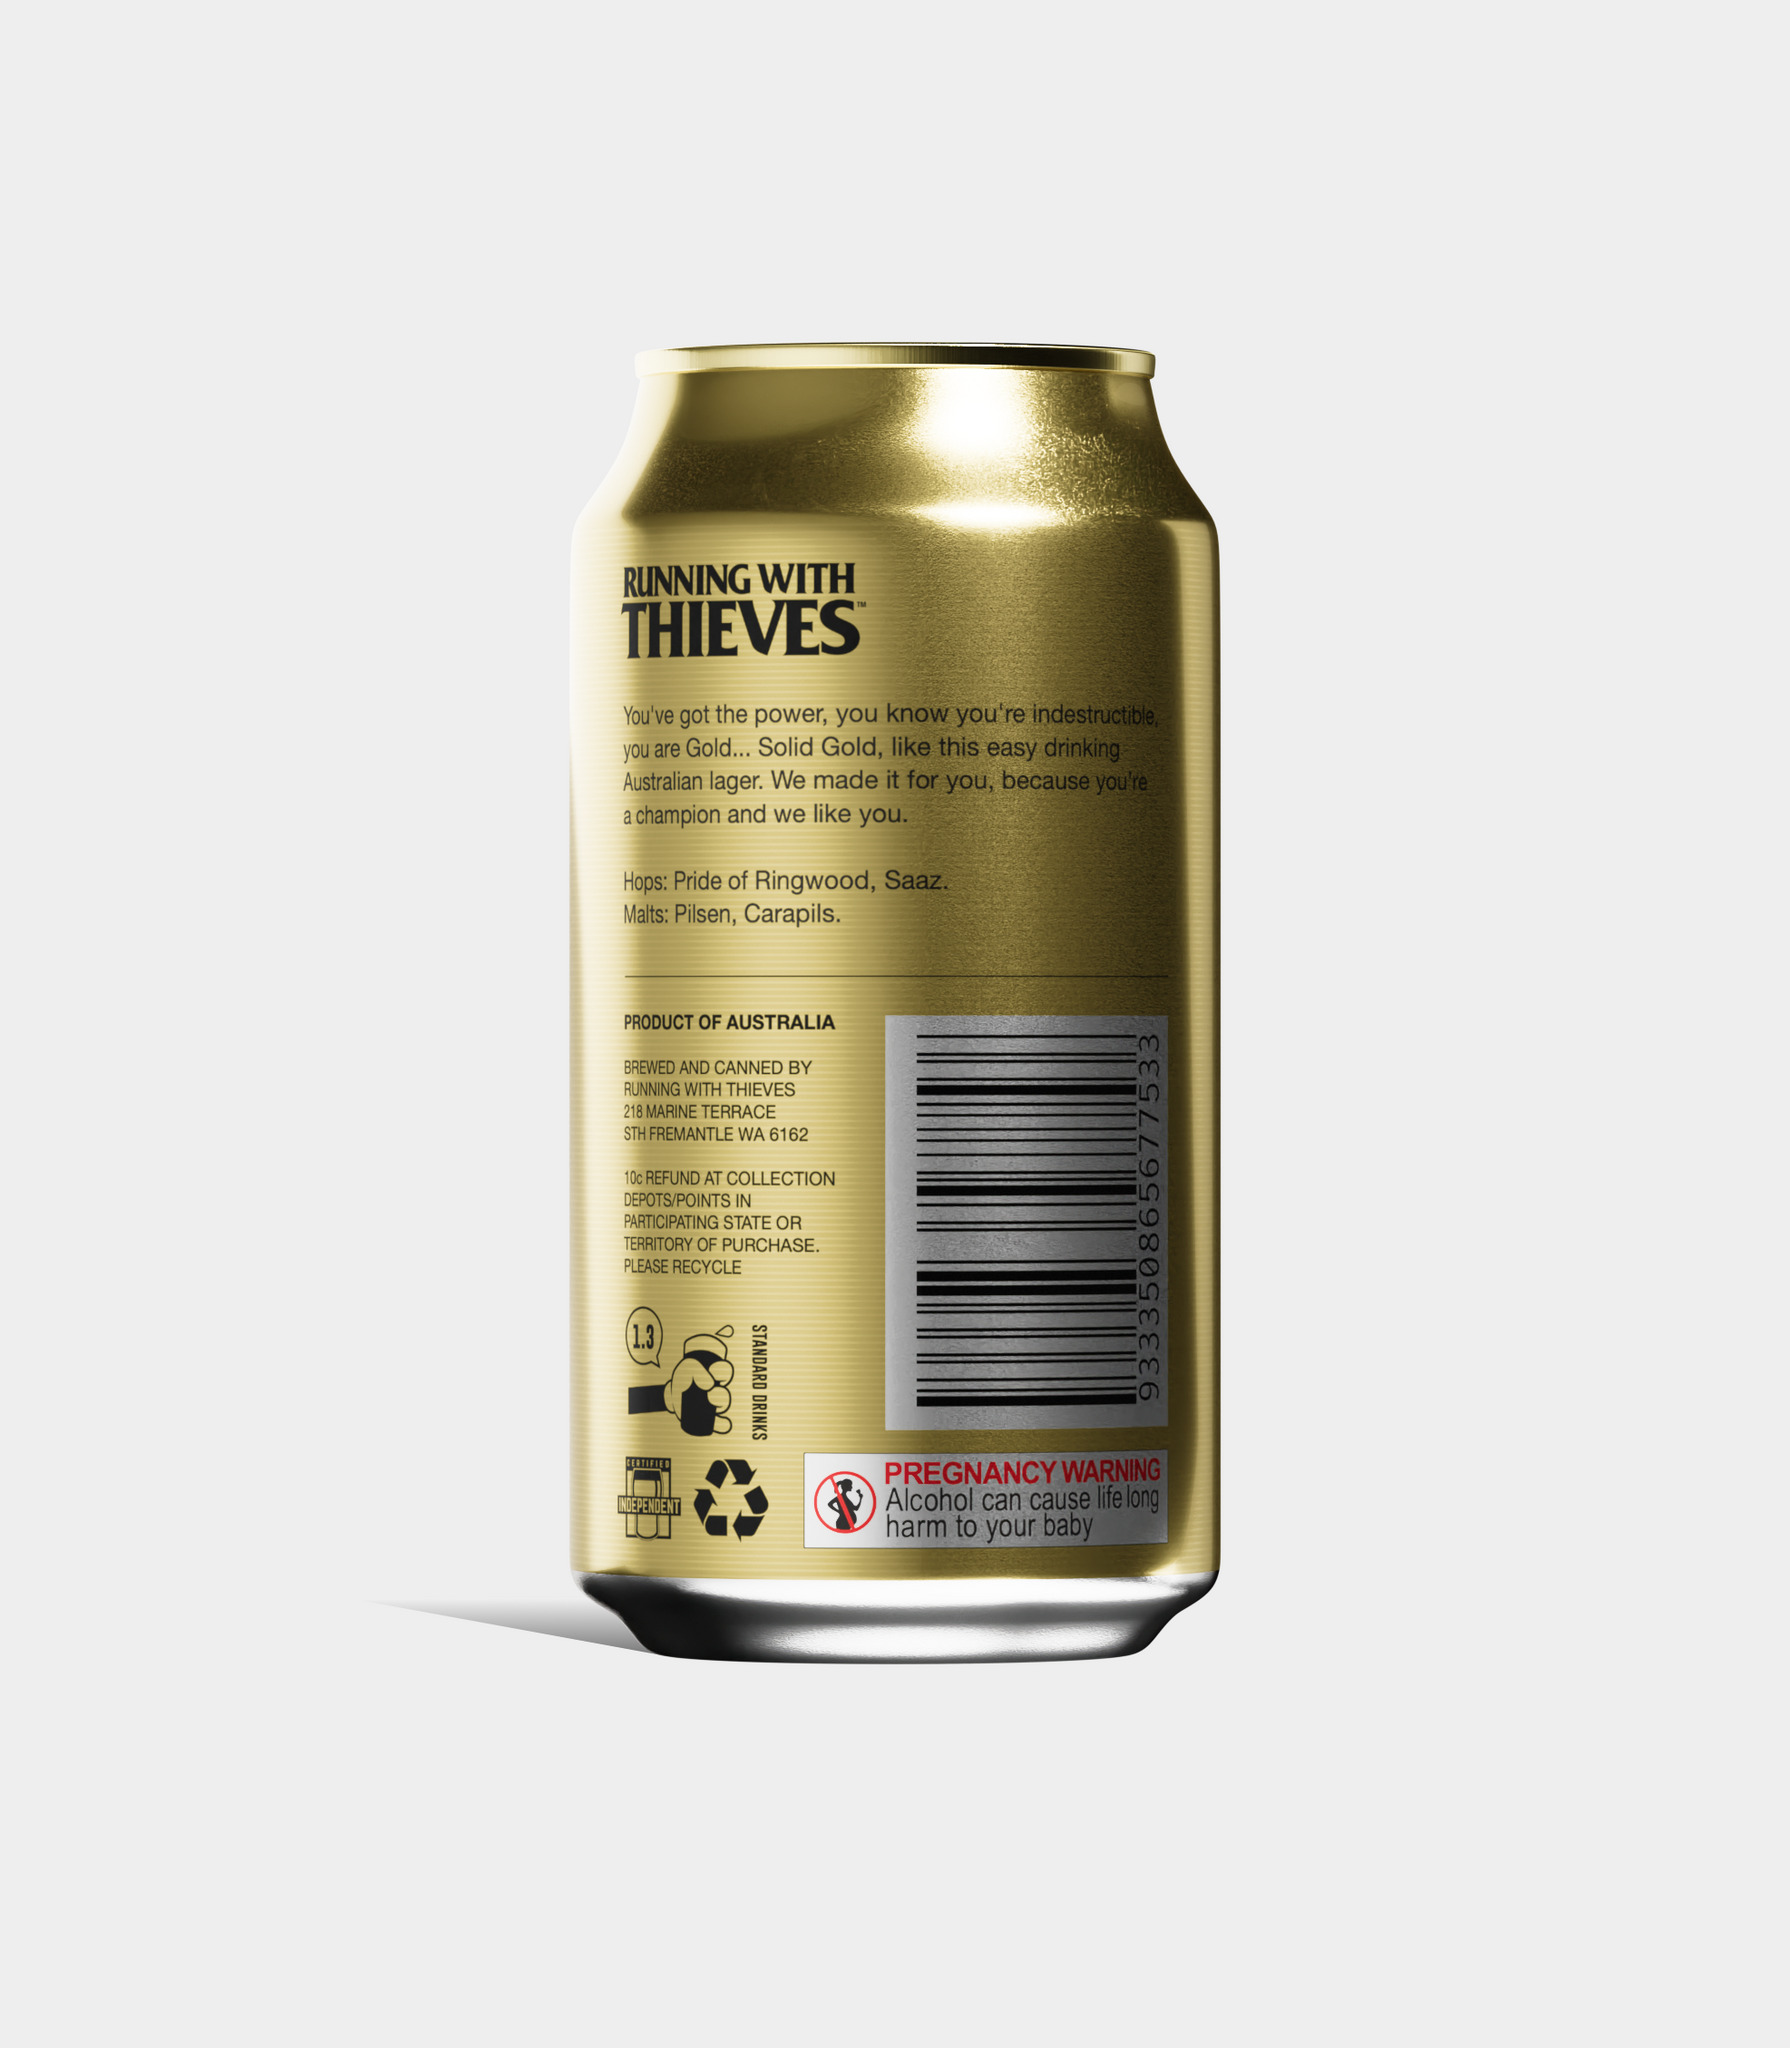 Thieves Lager